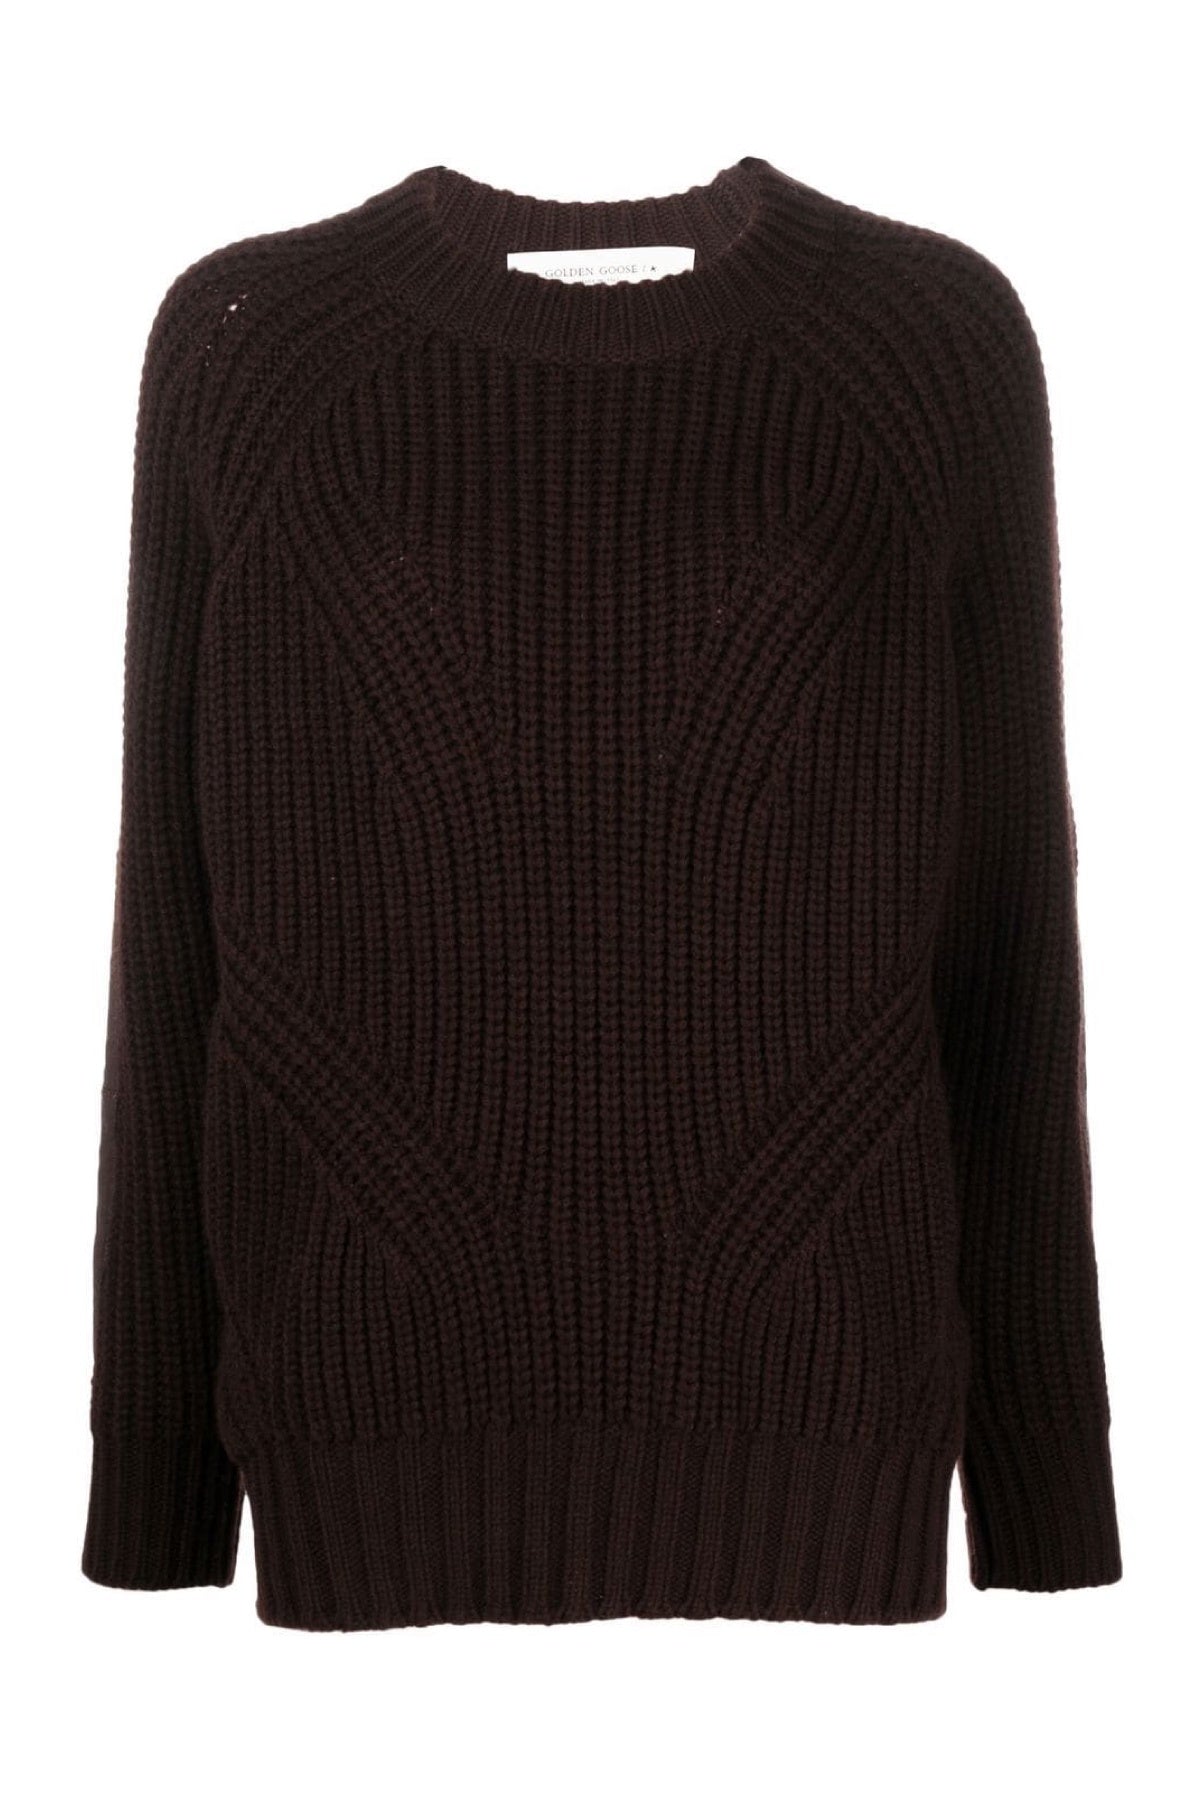 Golden Goose Boxy Leather Detail Jumper - Licorice